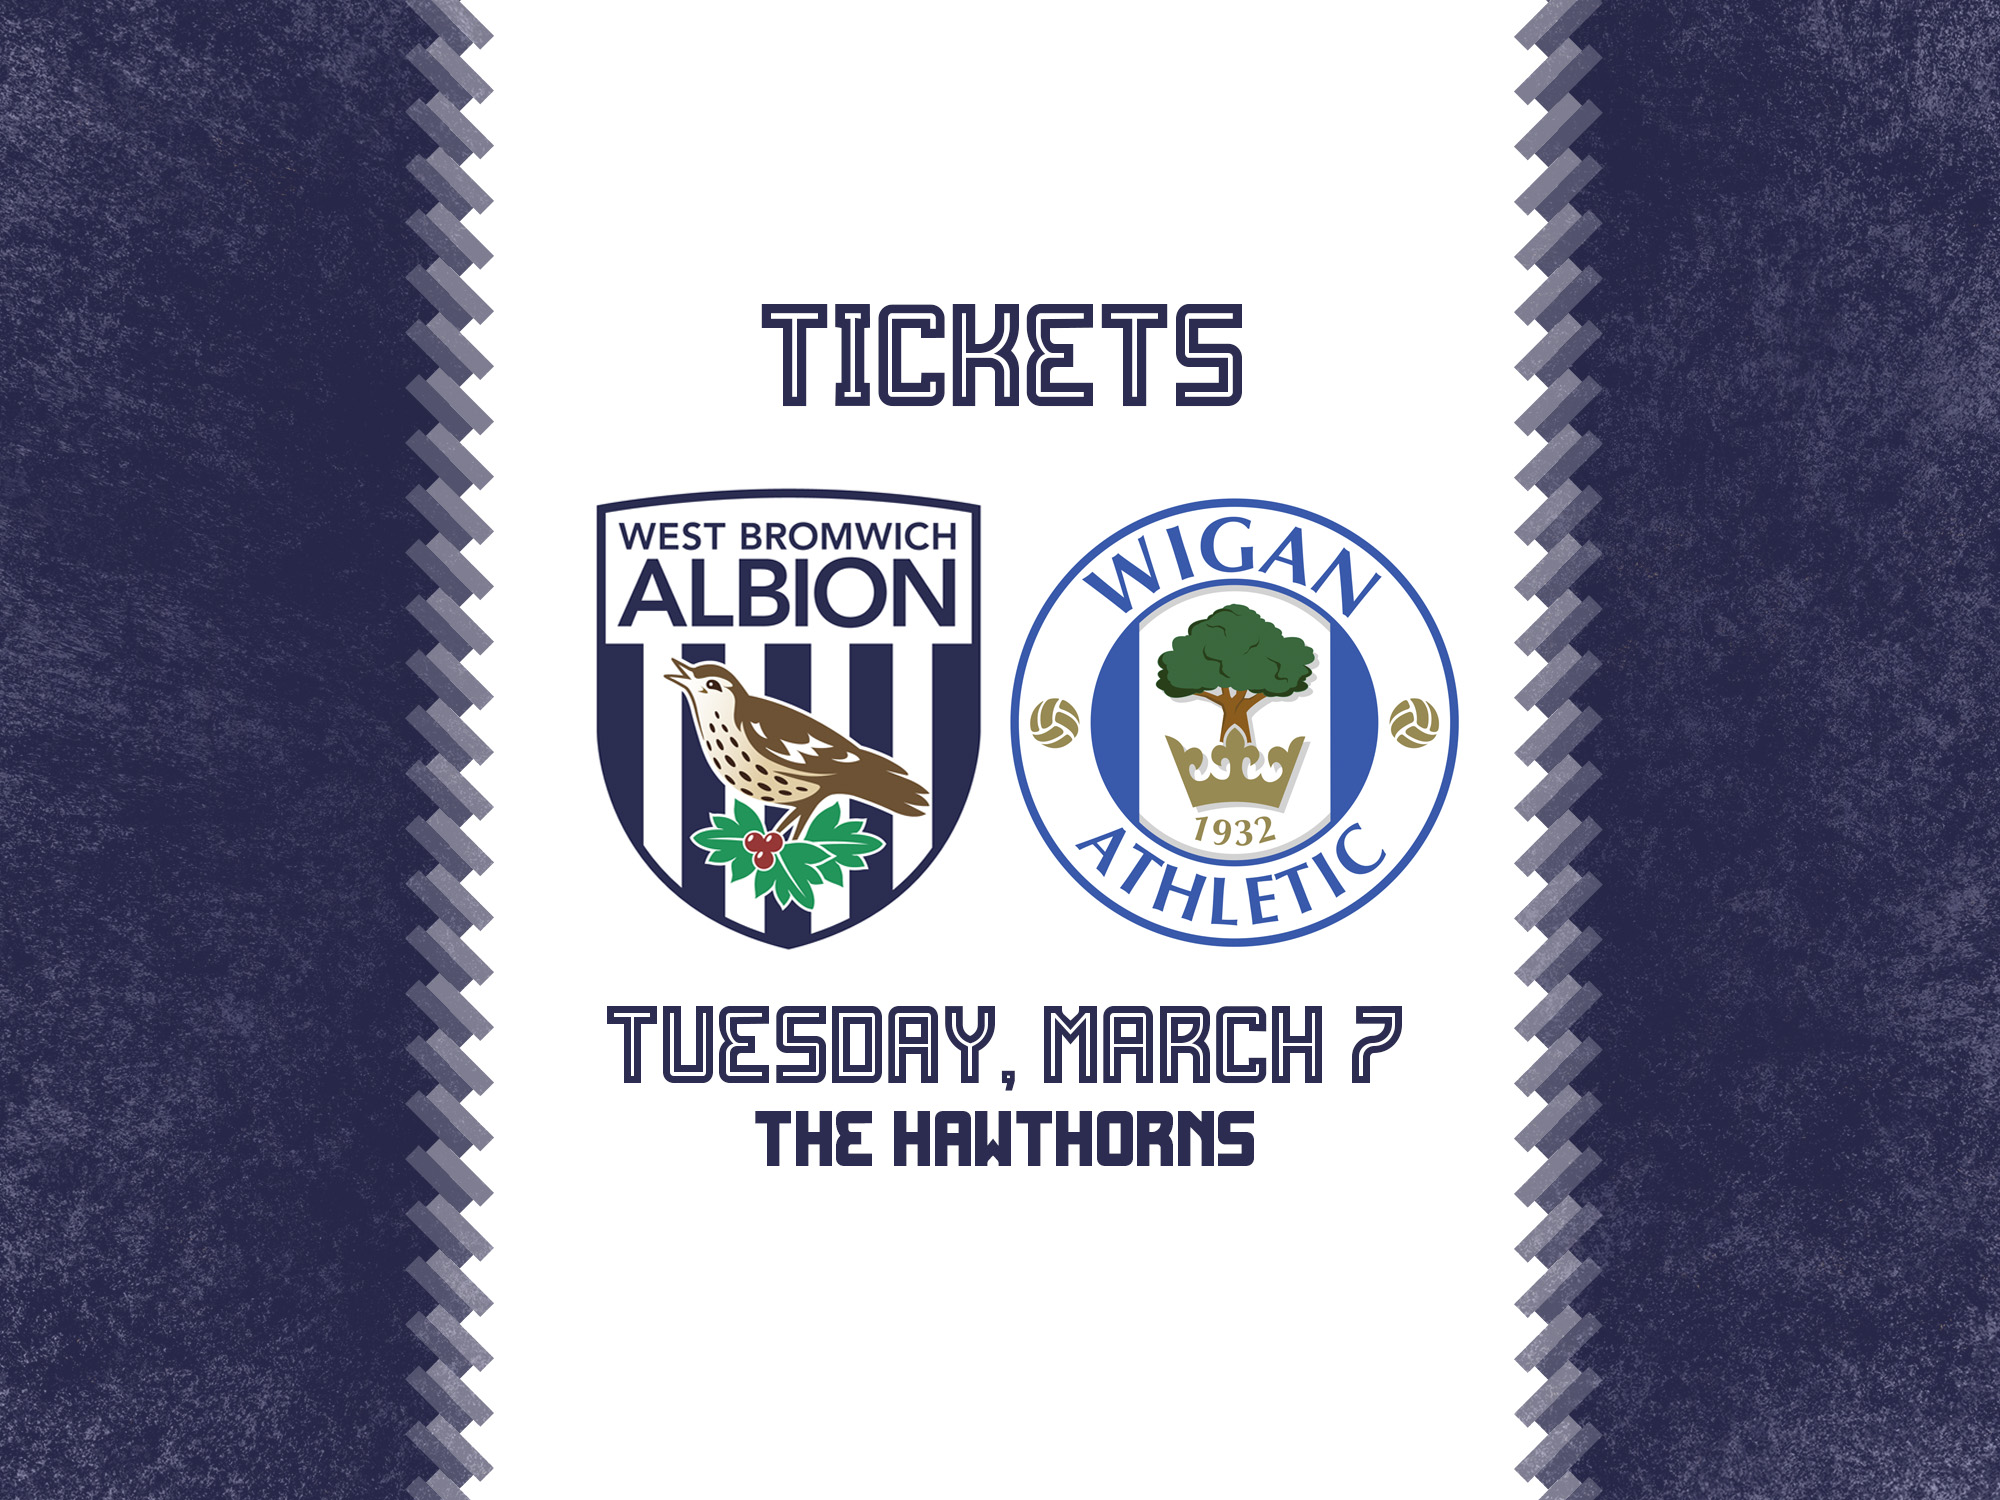 Albion and Wigan badges